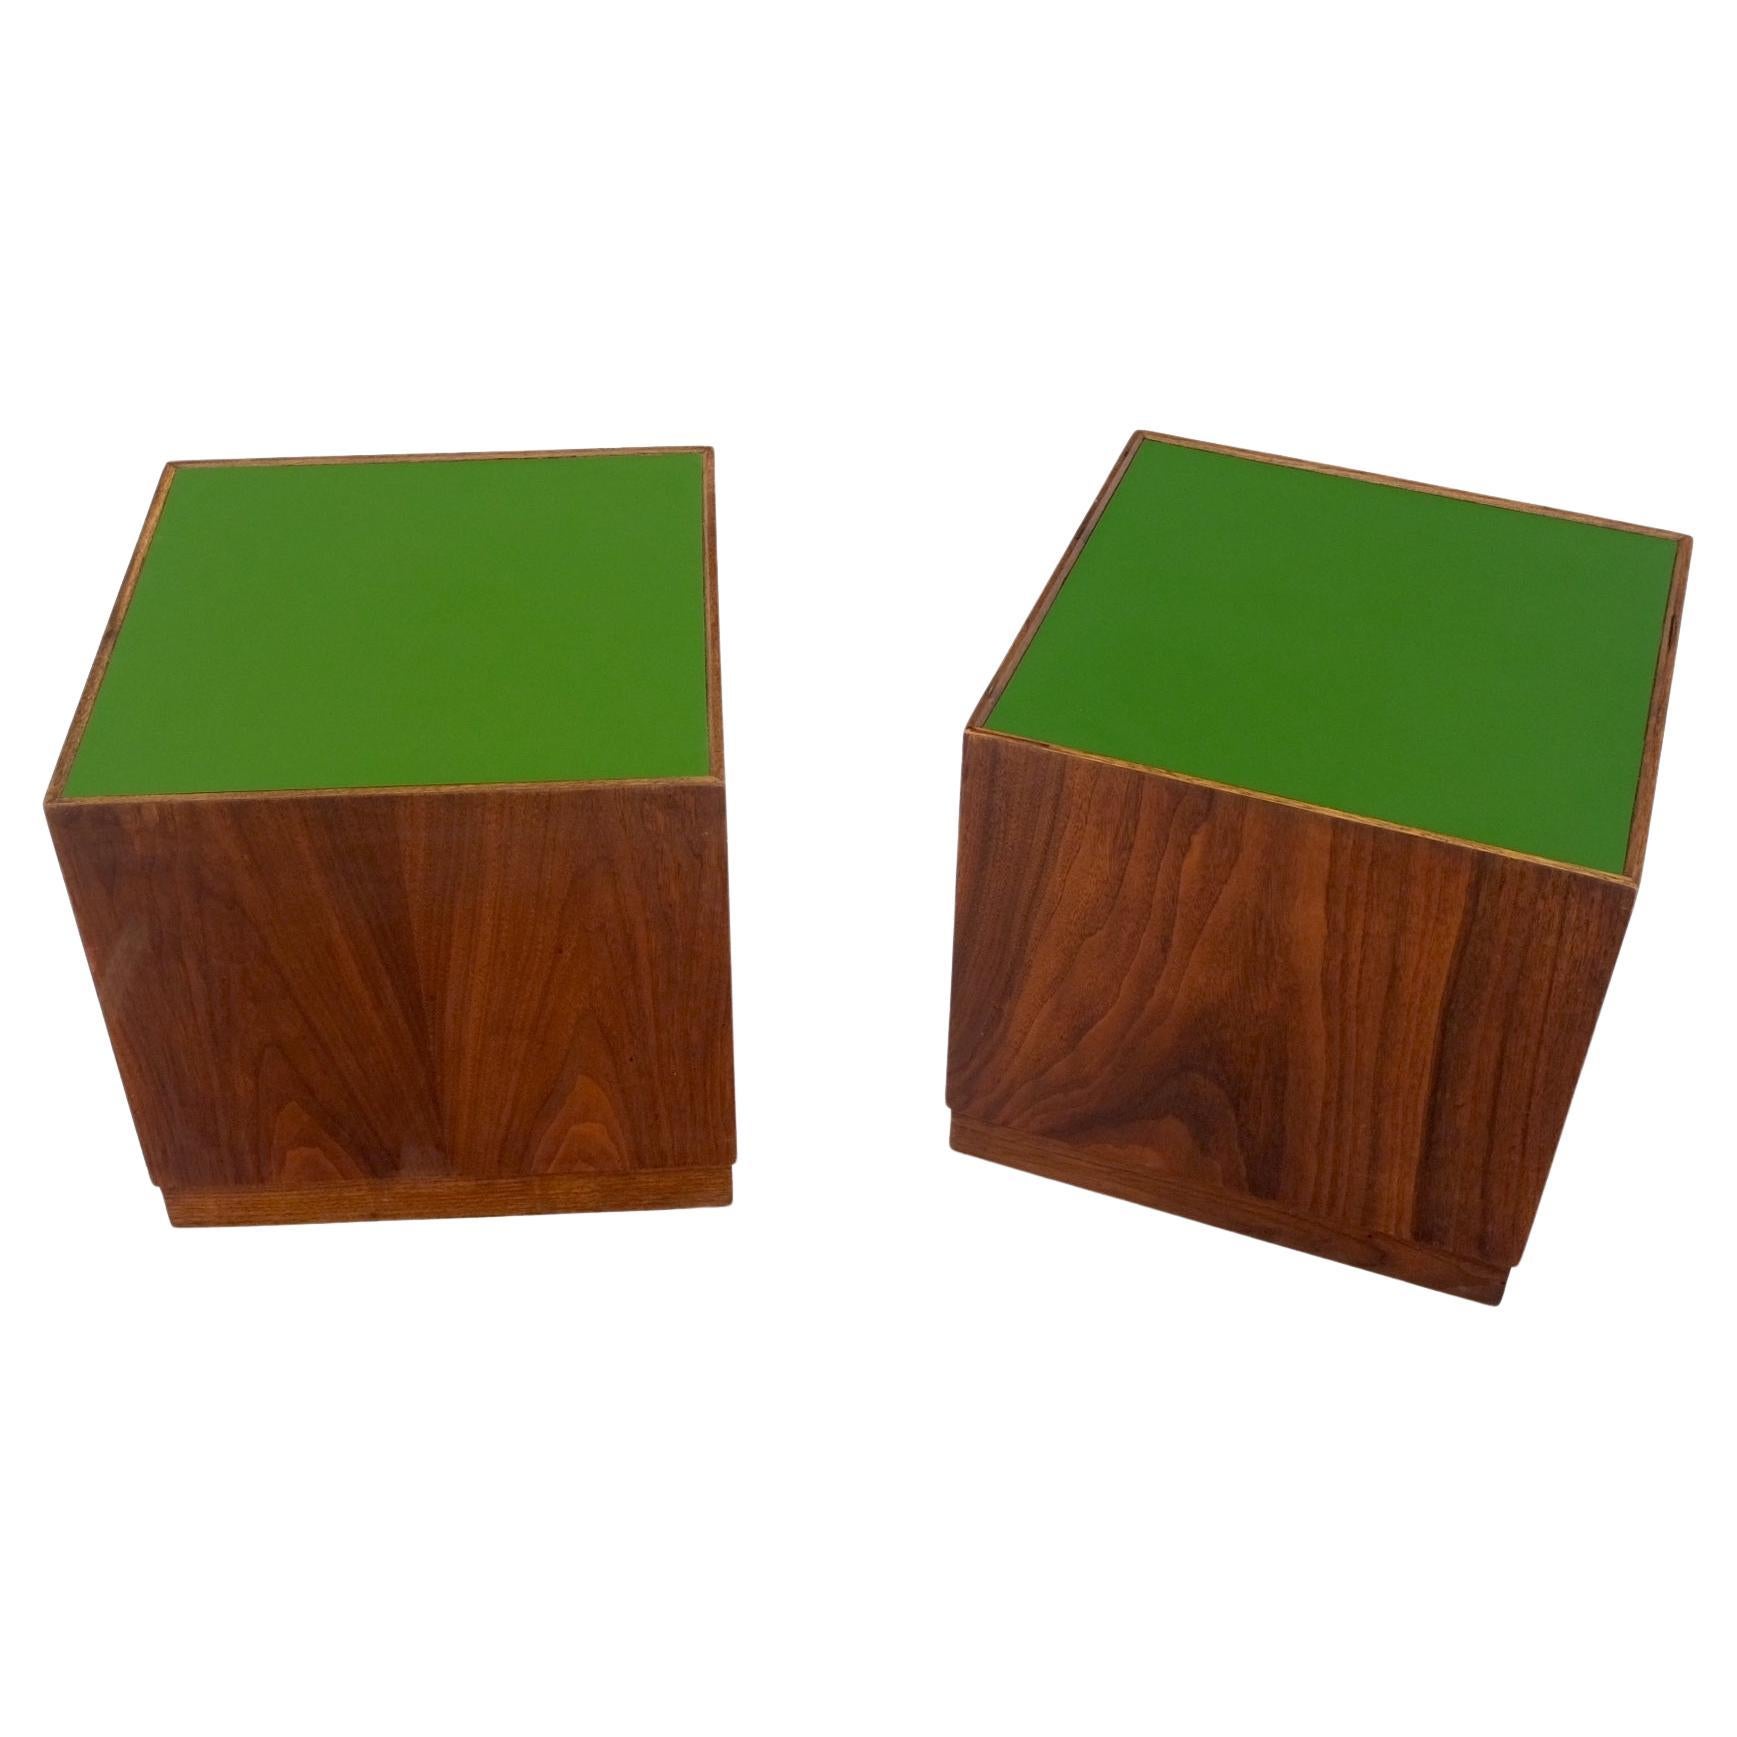 Pair of cube shape Walnut Mid-Century Modern end side occasional tables stands MINT!.